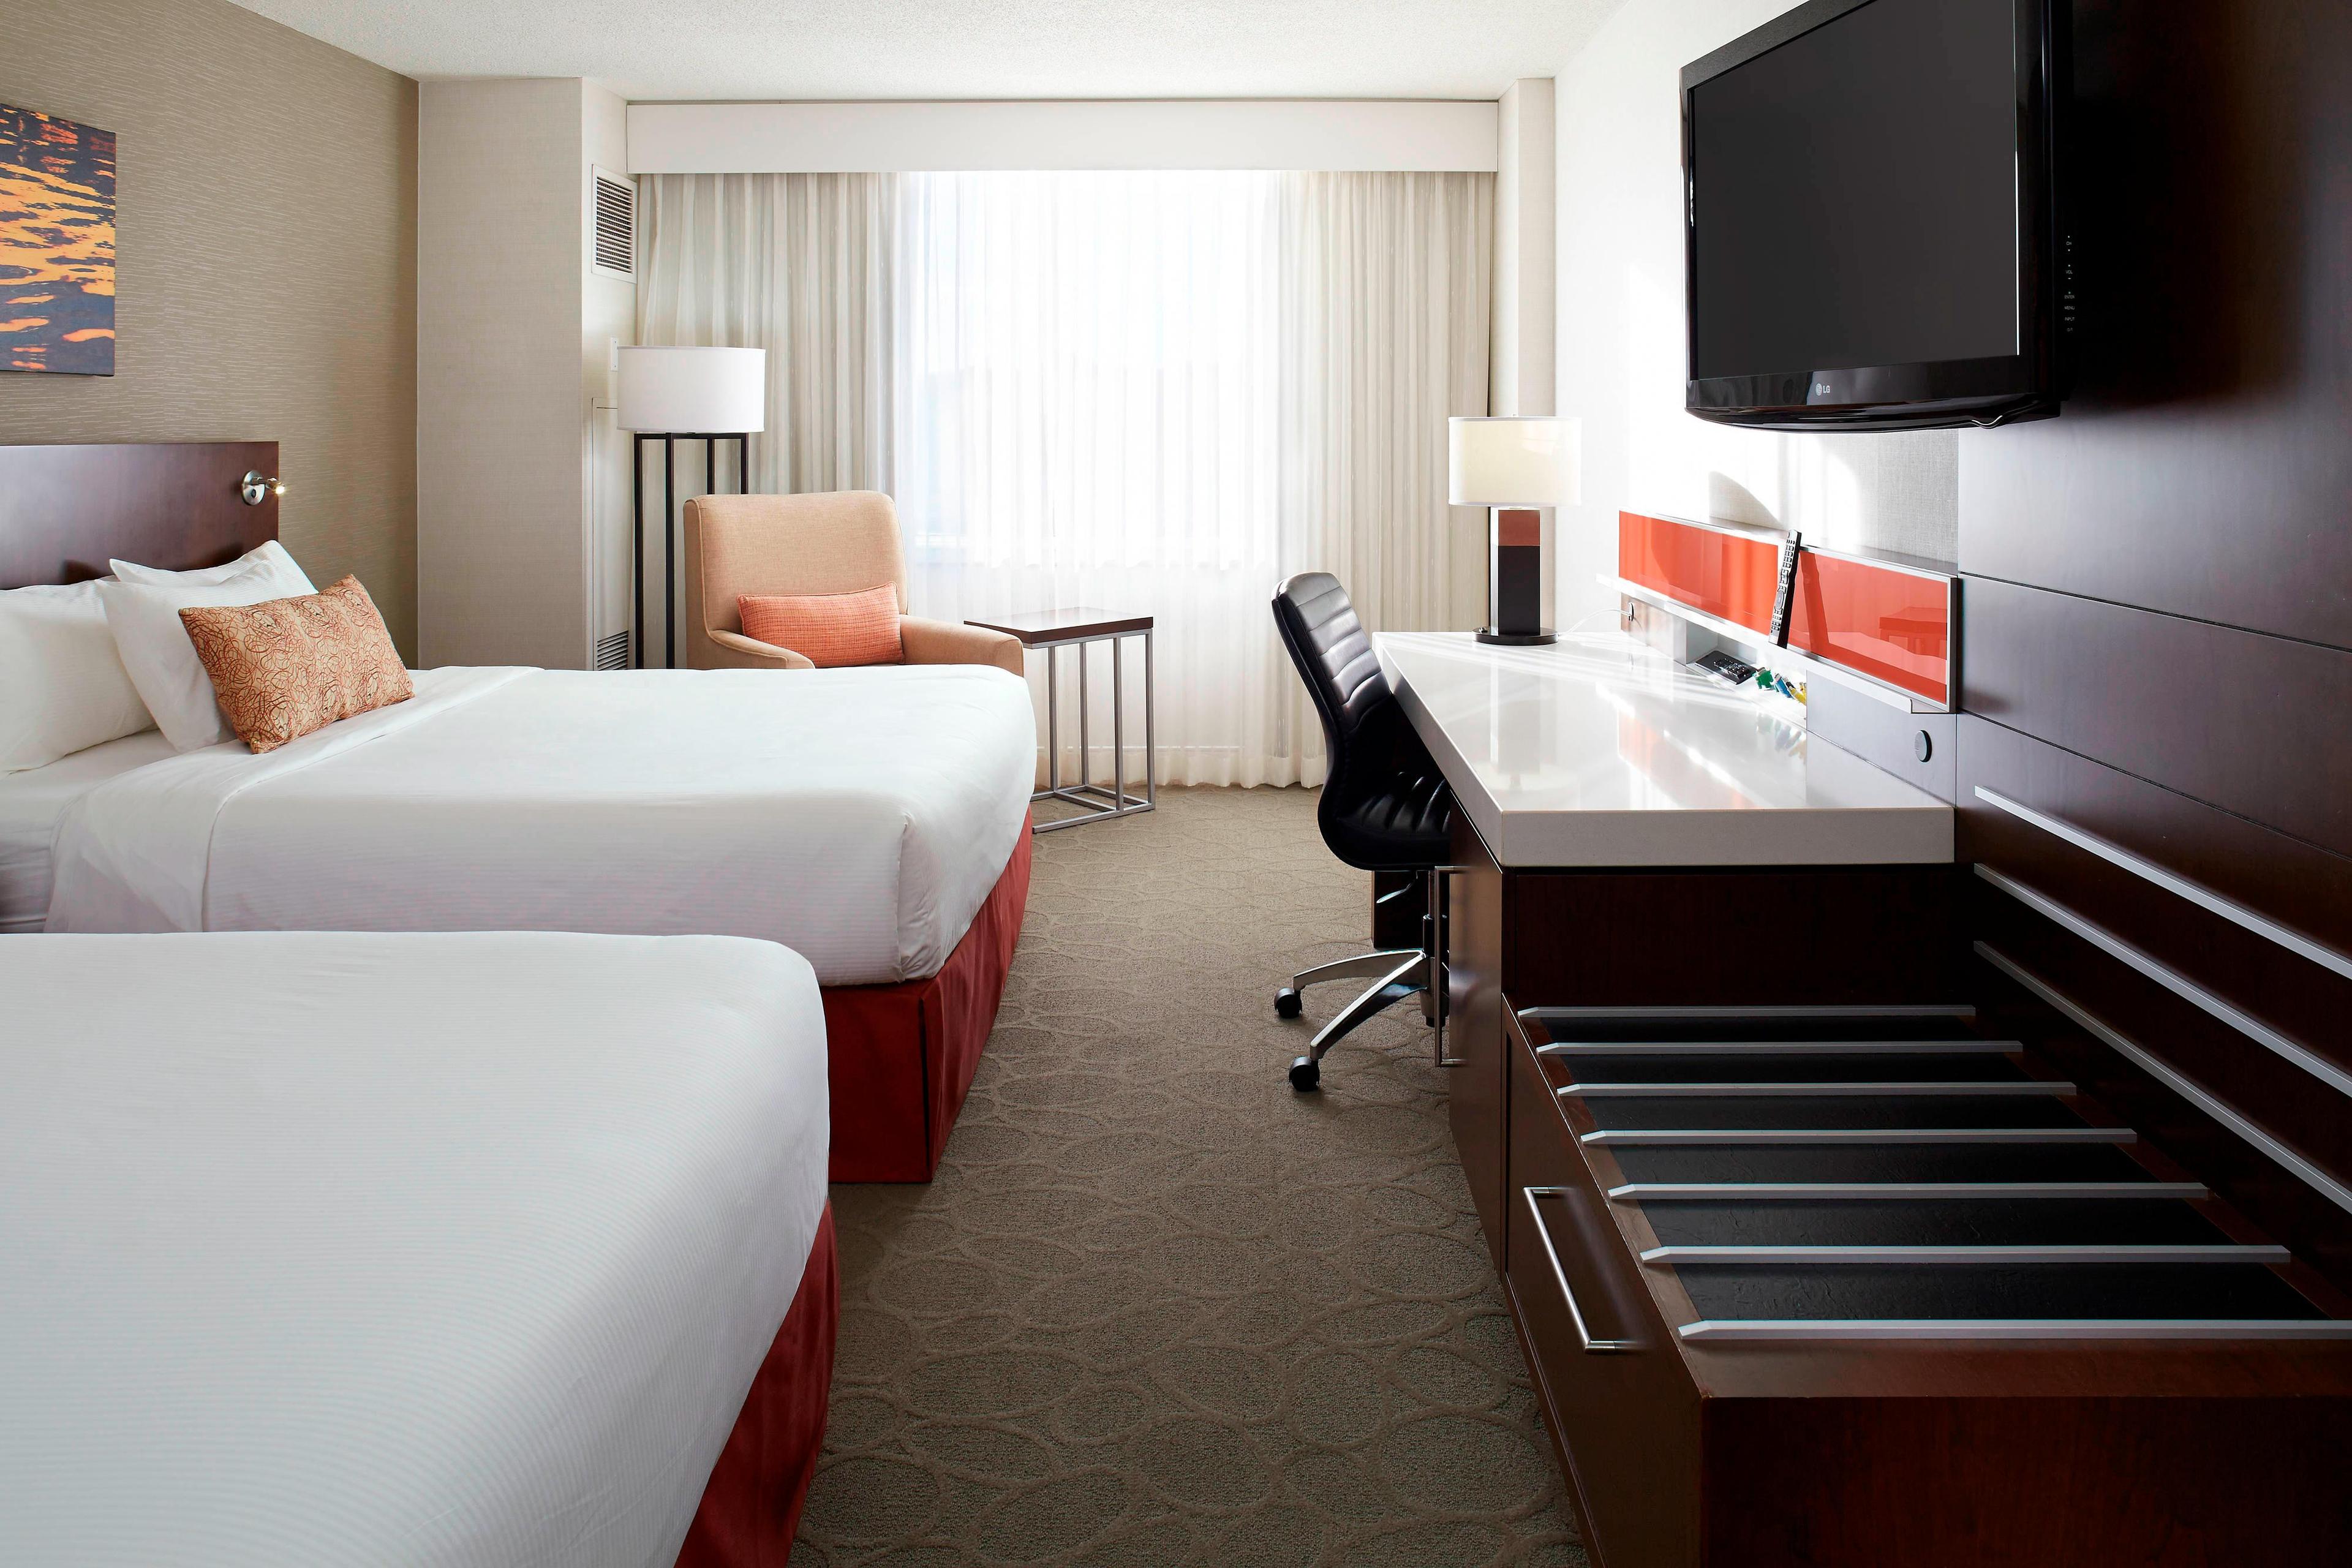 Our guest rooms feature chic décor and plenty of natural light, creating an ideal atmosphere for relaxing or working.